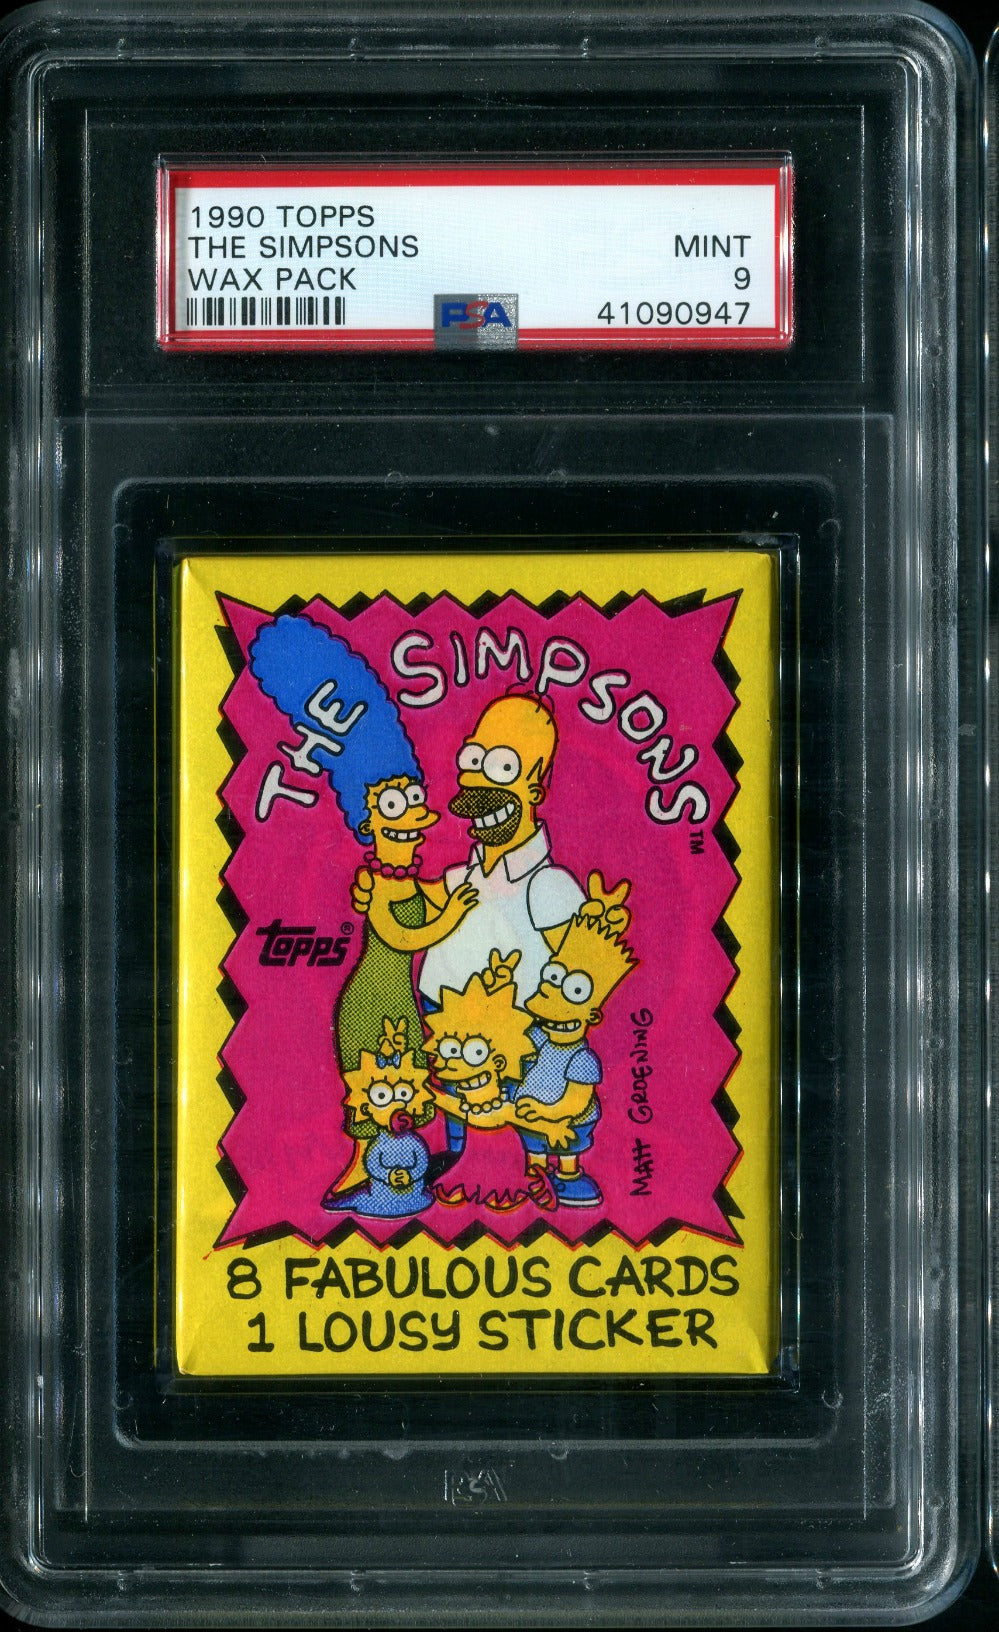 1990 Topps The Simpsons Unopened Wax Pack PSA 9 (Simpsons)